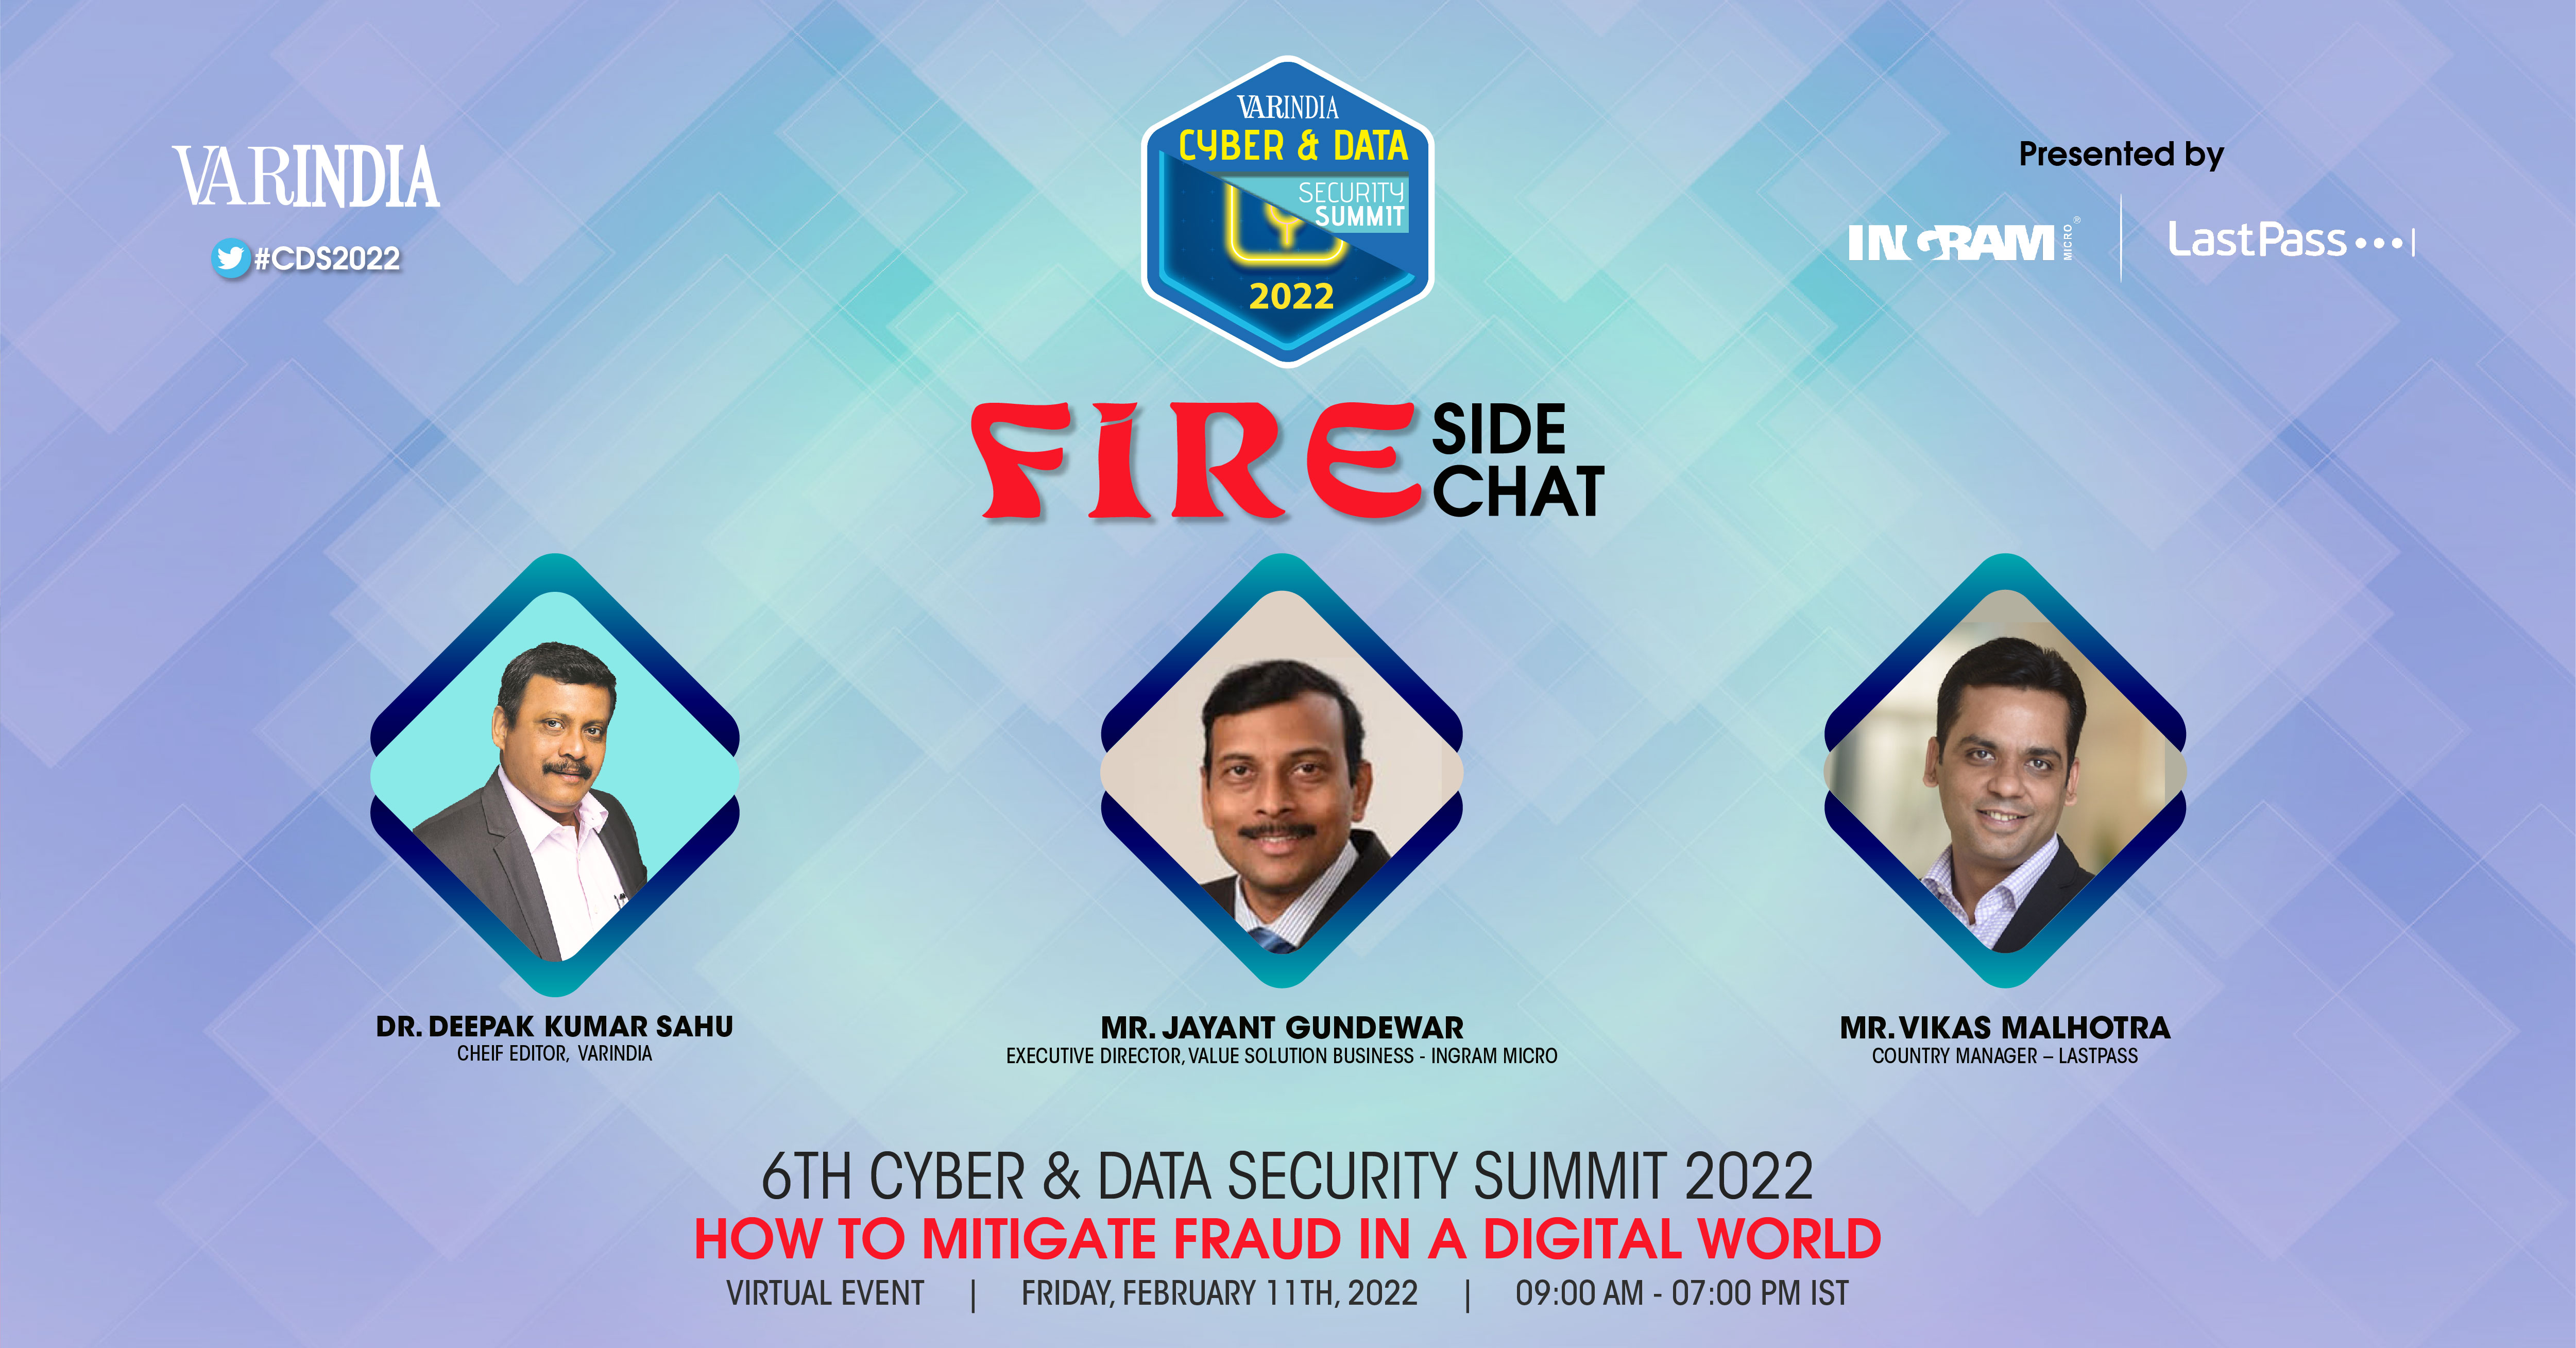 Fireside Chat Session with Dr. Deepak Kumar Sahu, Editor-in-Chief, VARINDIA and Mr. Jayant Gundewar- Executive Director, Value Solution Business- Ingr